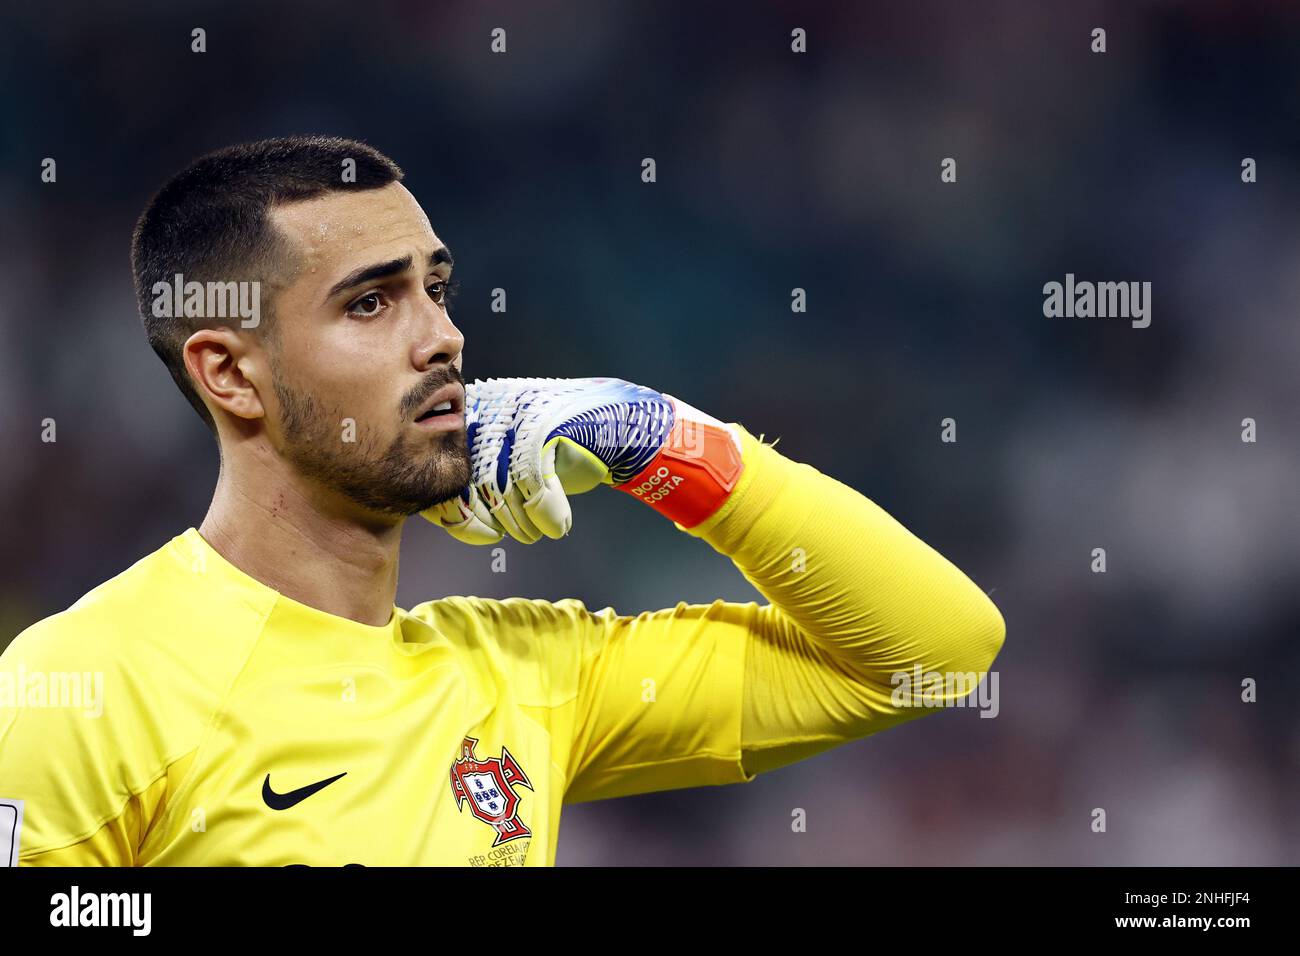 DOHA - Portugal goalkeeper Diogo Costa during the FIFA World Cup Qatar 2022 group H match between South Korea and Portugal at Education City Stadium on December 2, 2022 in Doha, Qatar. AP | Dutch Height | MAURICE OF STONE Stock Photo